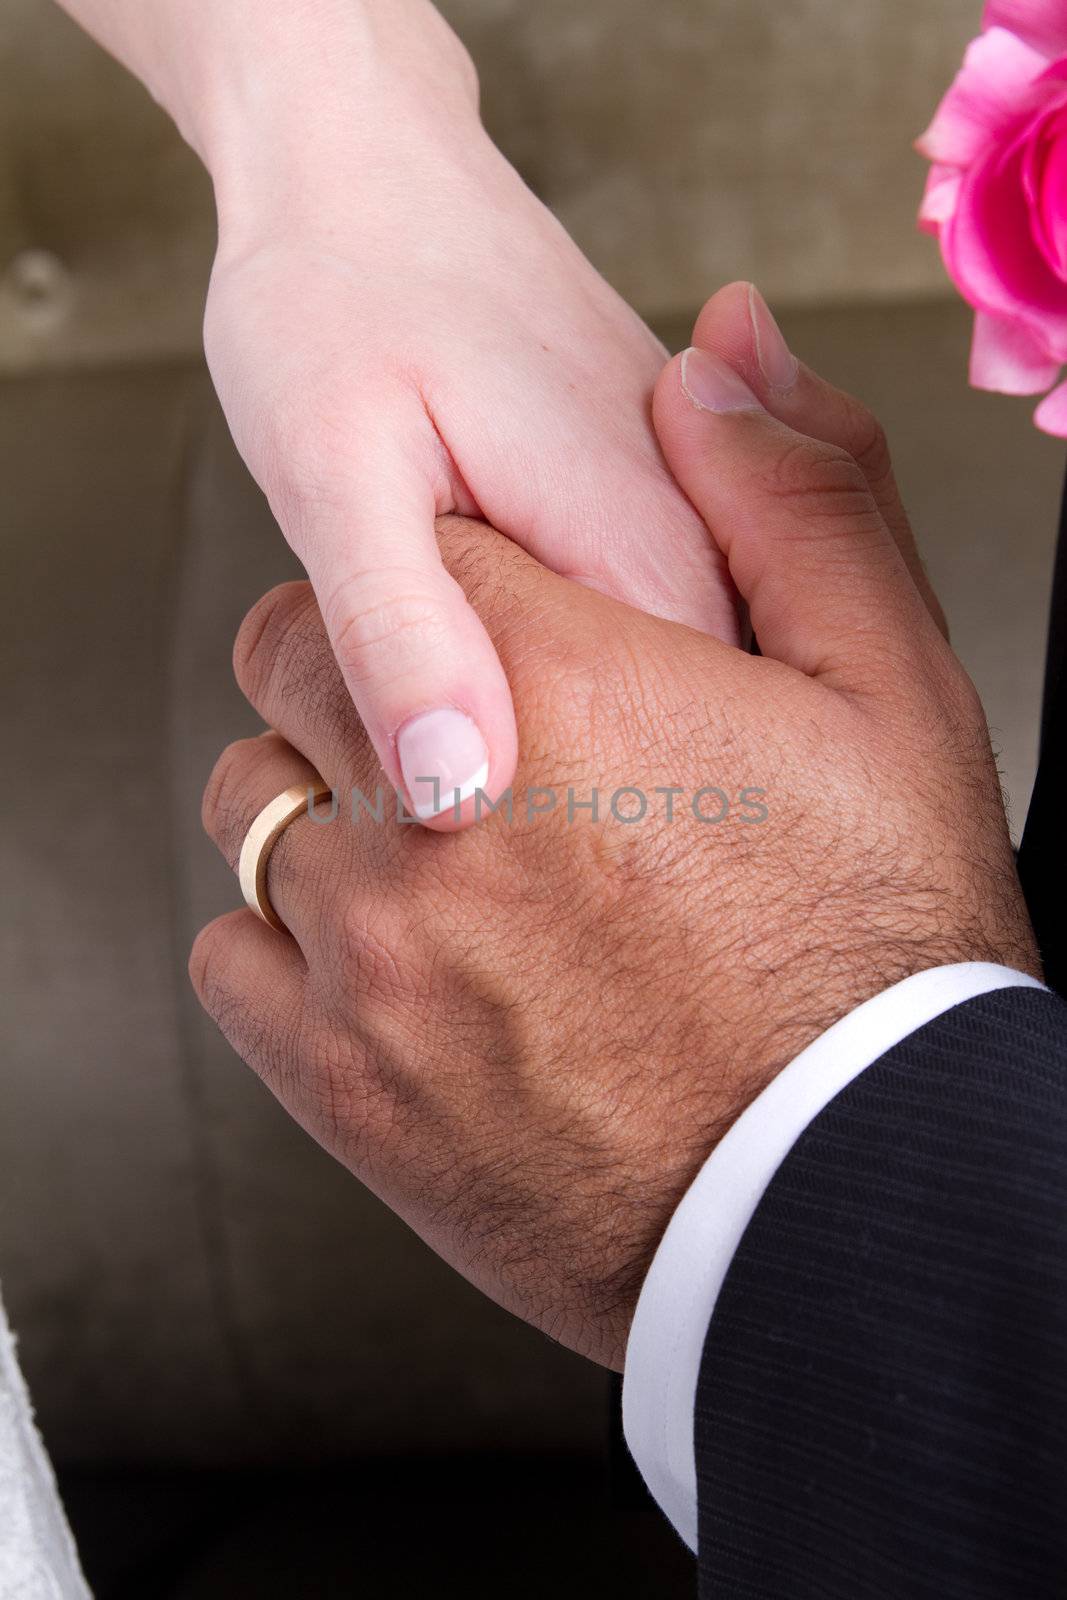 Newly wed couple holding hands and showing their love.